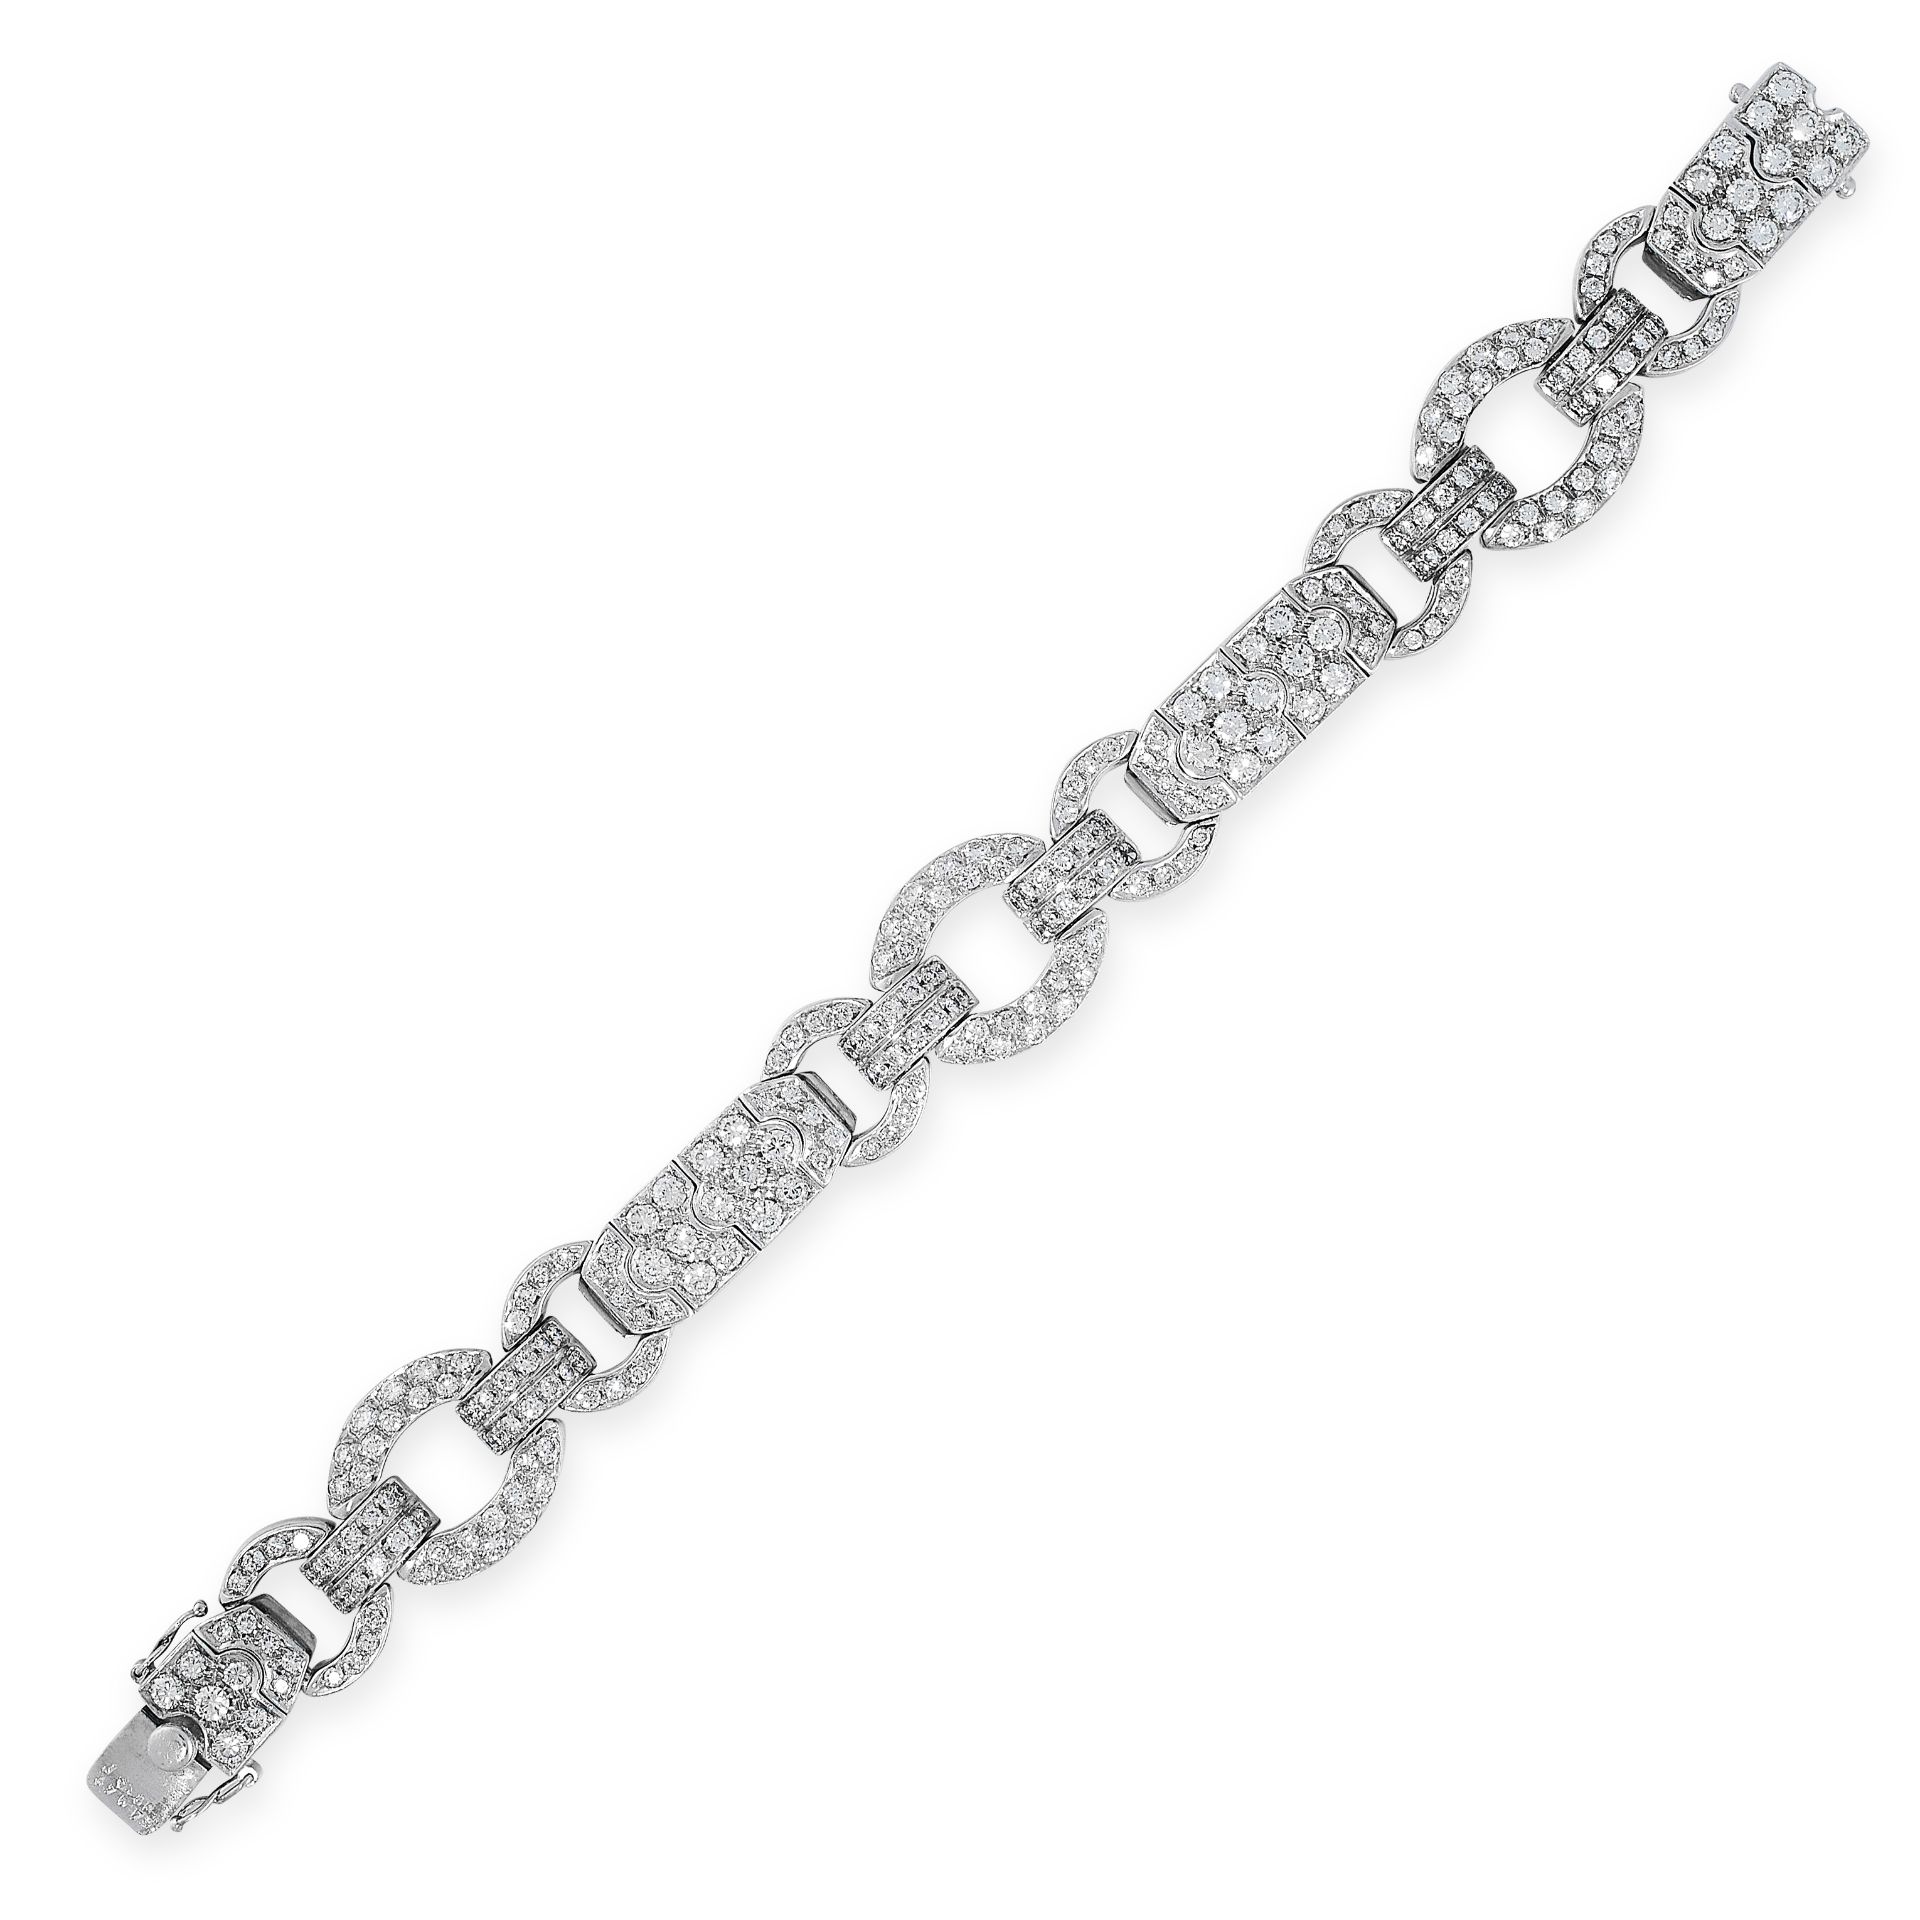 A VINTAGE DIAMOND BRACELET in 18ct white gold, comprising of a series of articulated links of